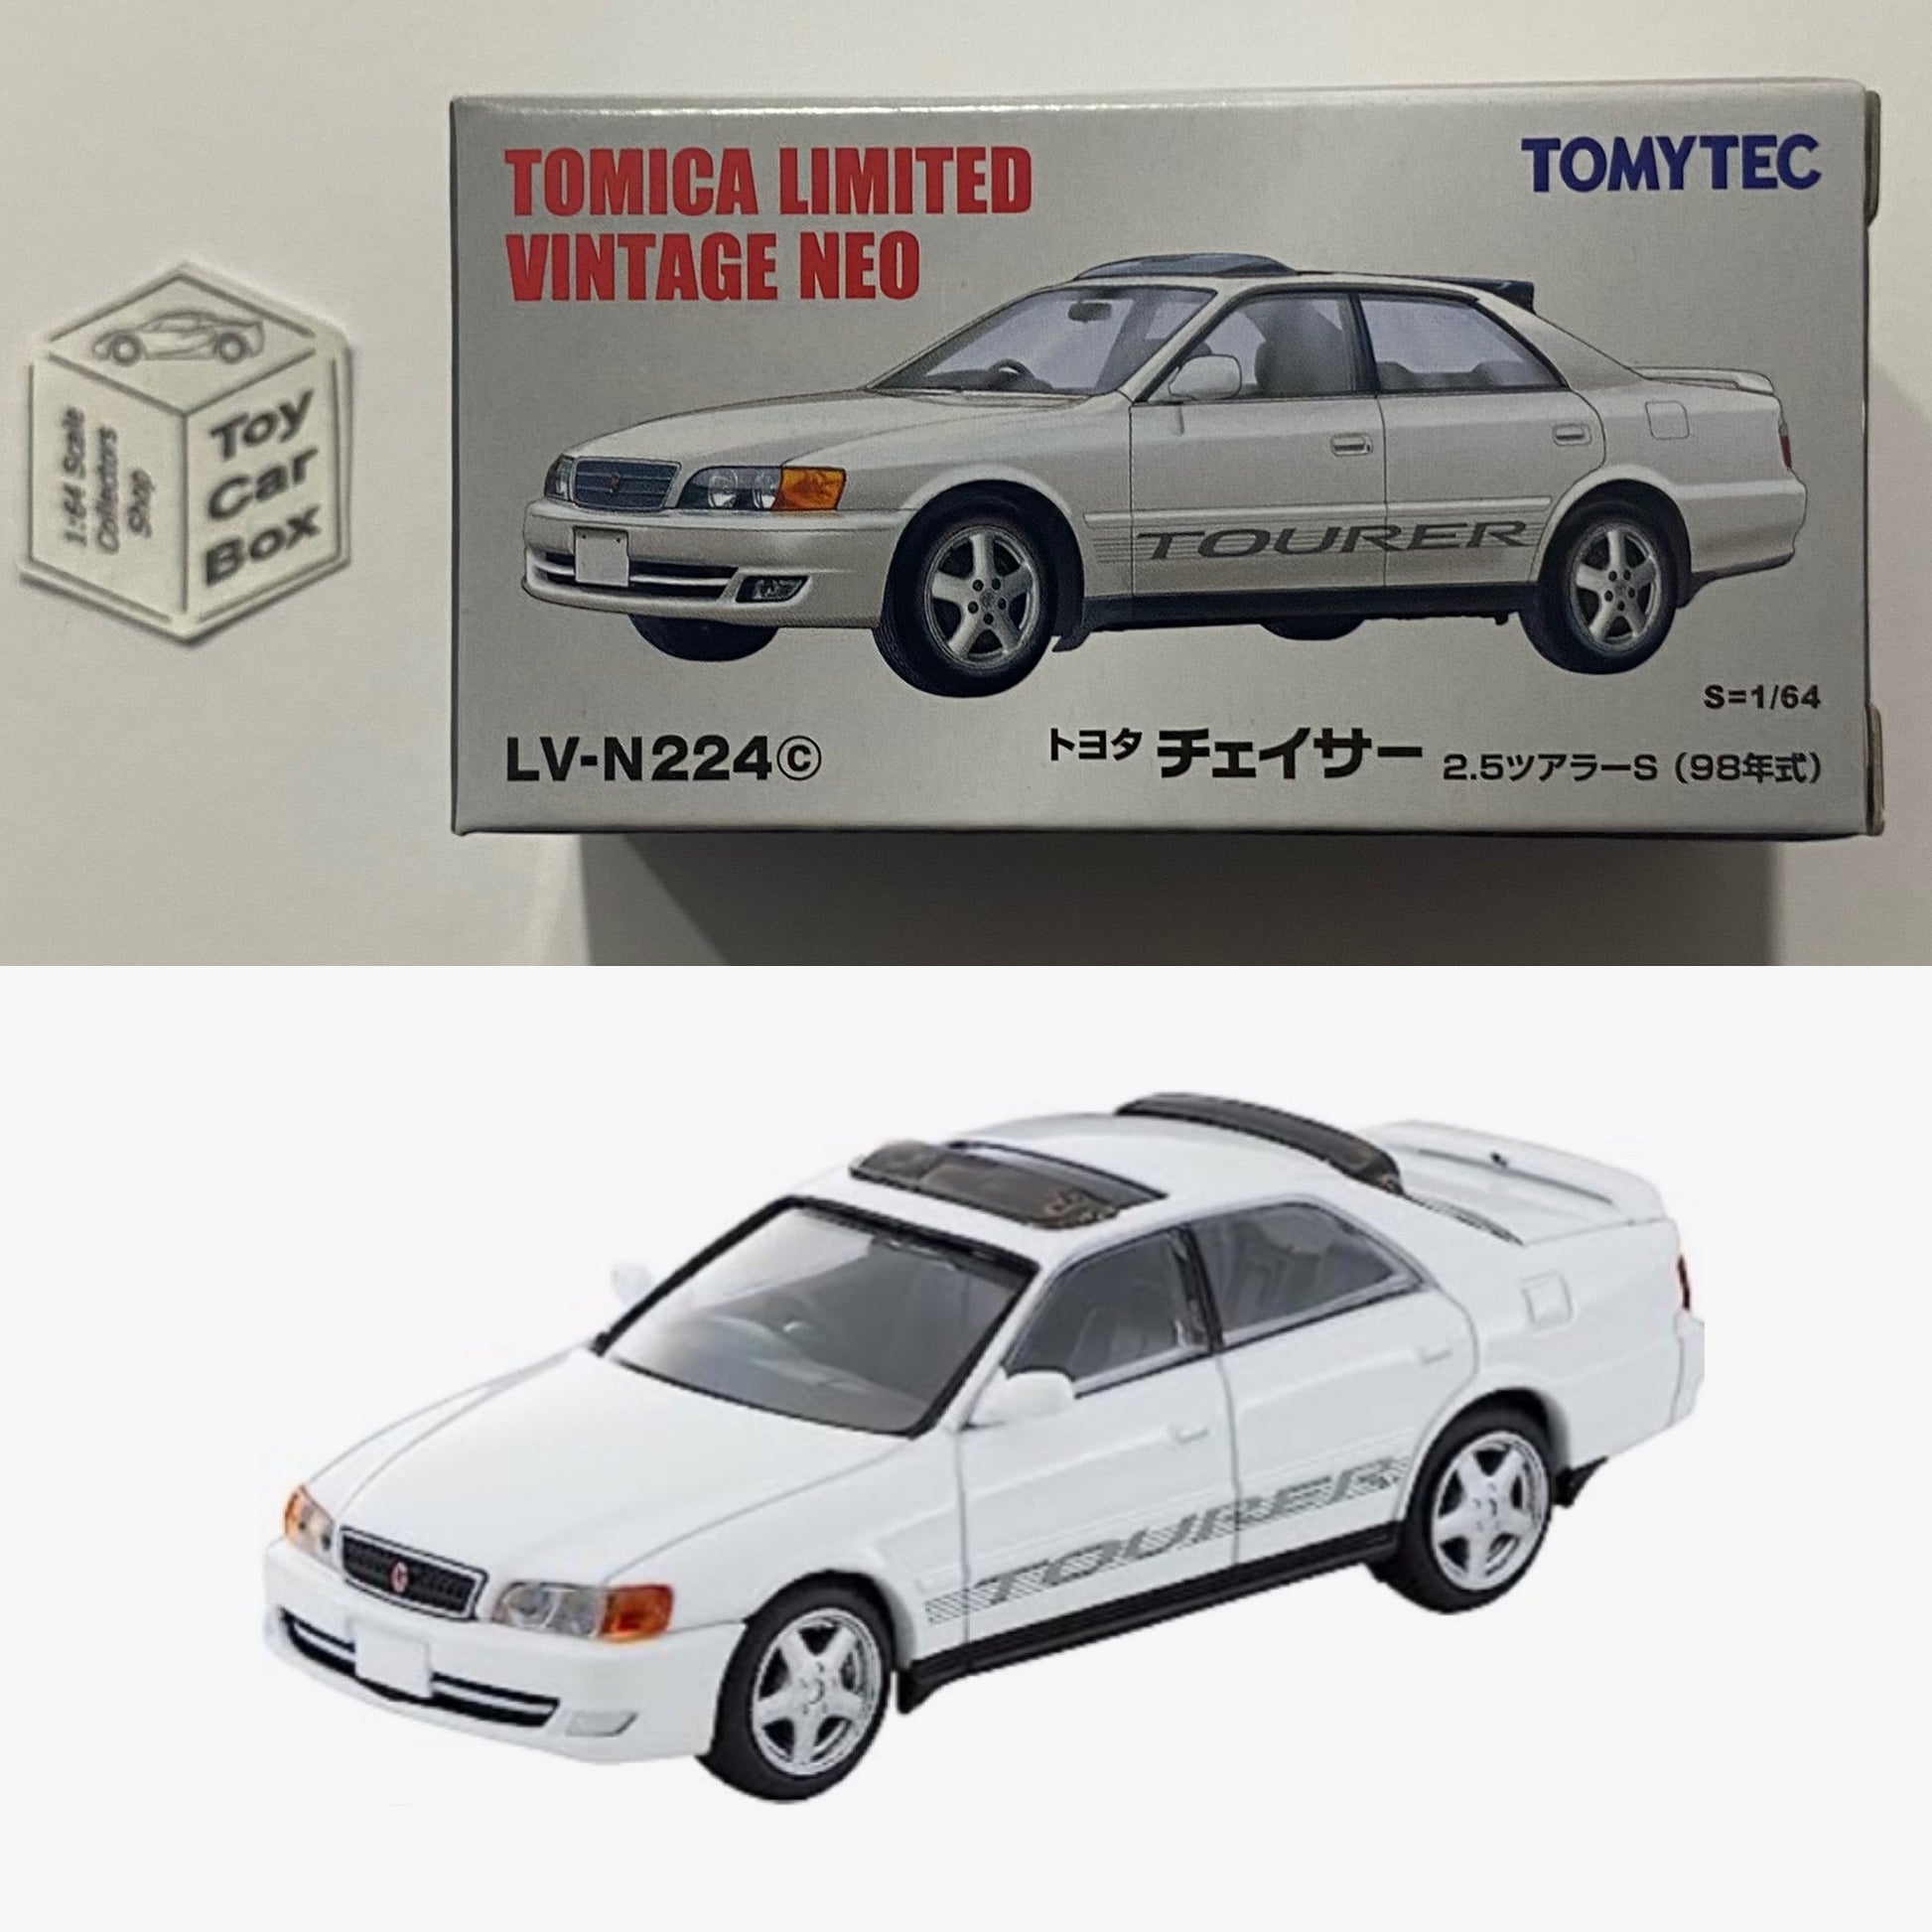 Mail call : two new Tomica Limited Vintage models for my